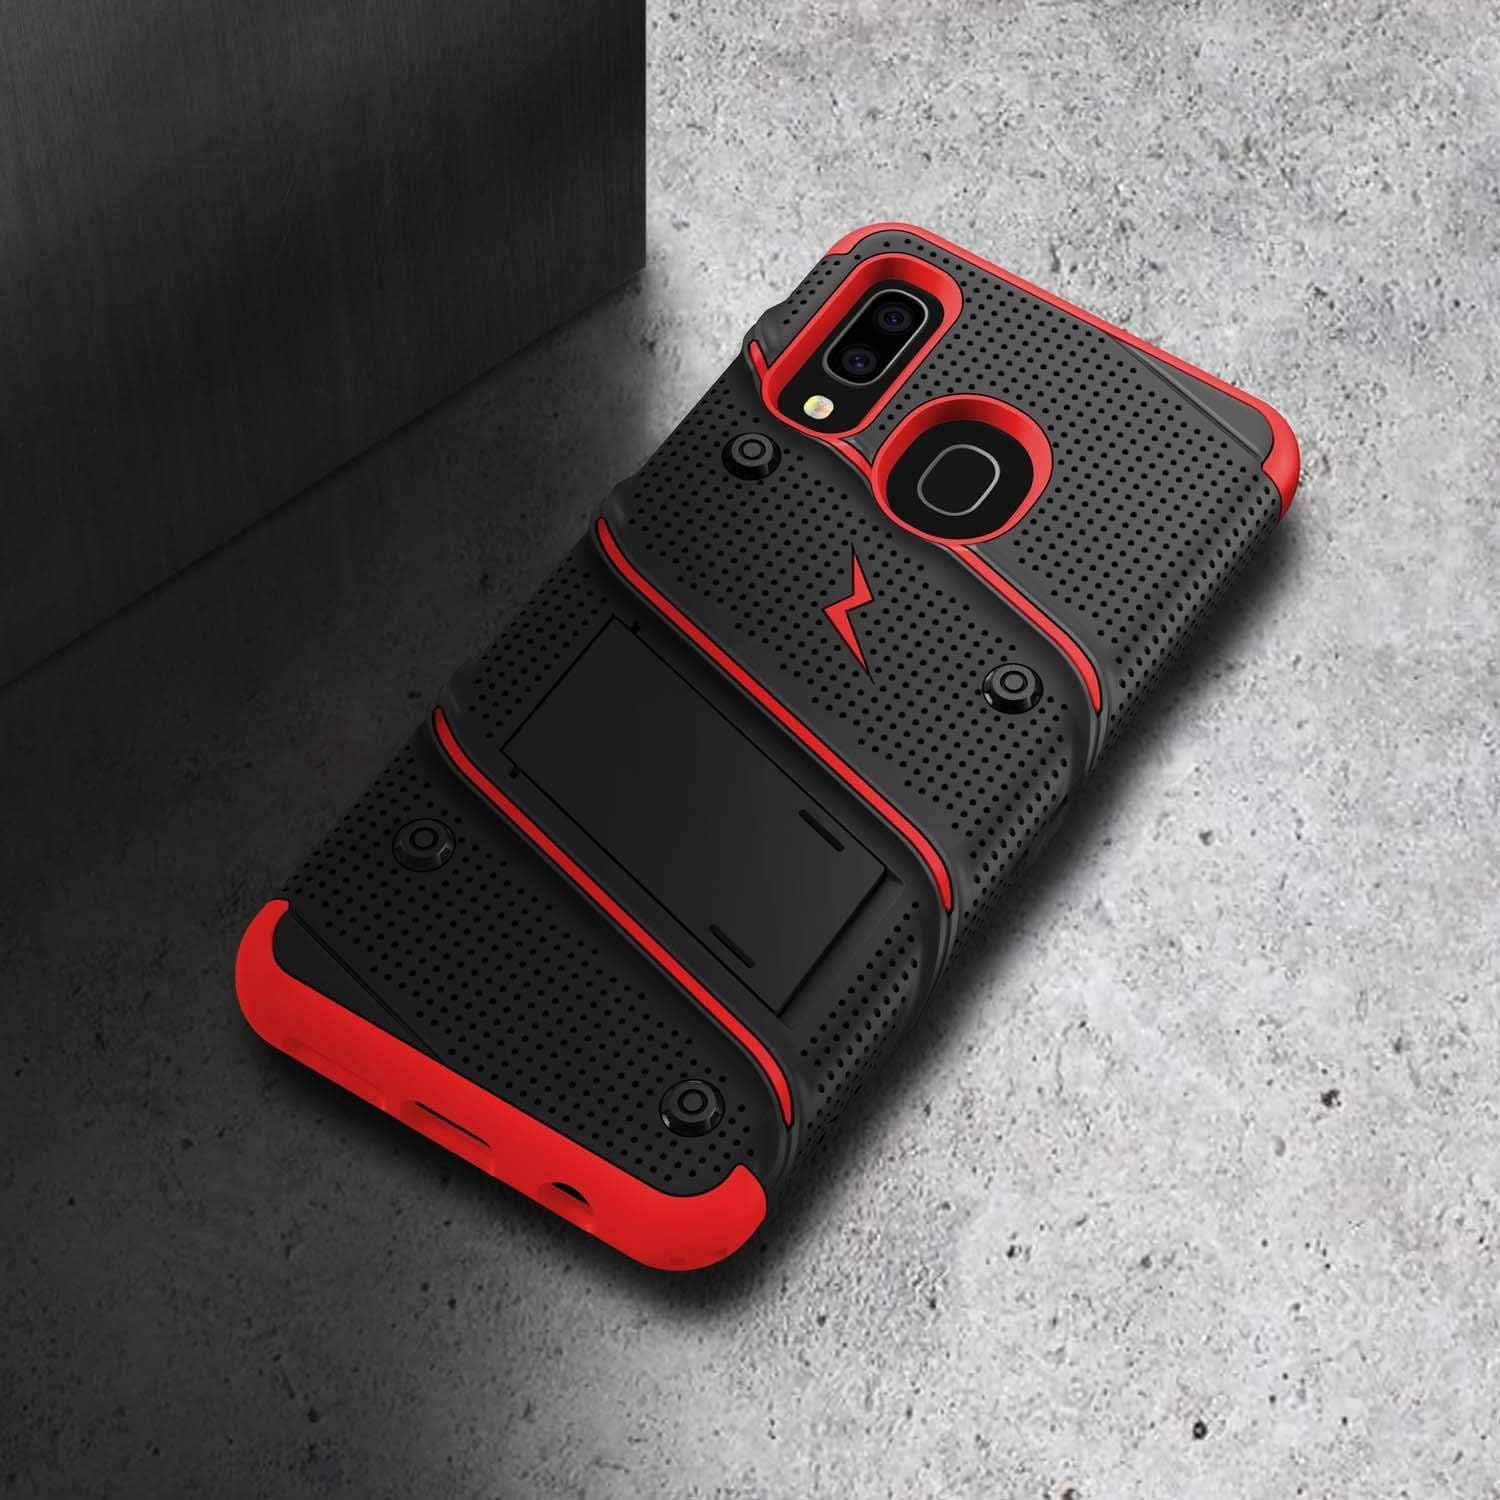 ZIZO Bolt Galaxy A20 - Holster Case, Built-in Kickstand, Tempered Glass & Lanyard (3 Colors)